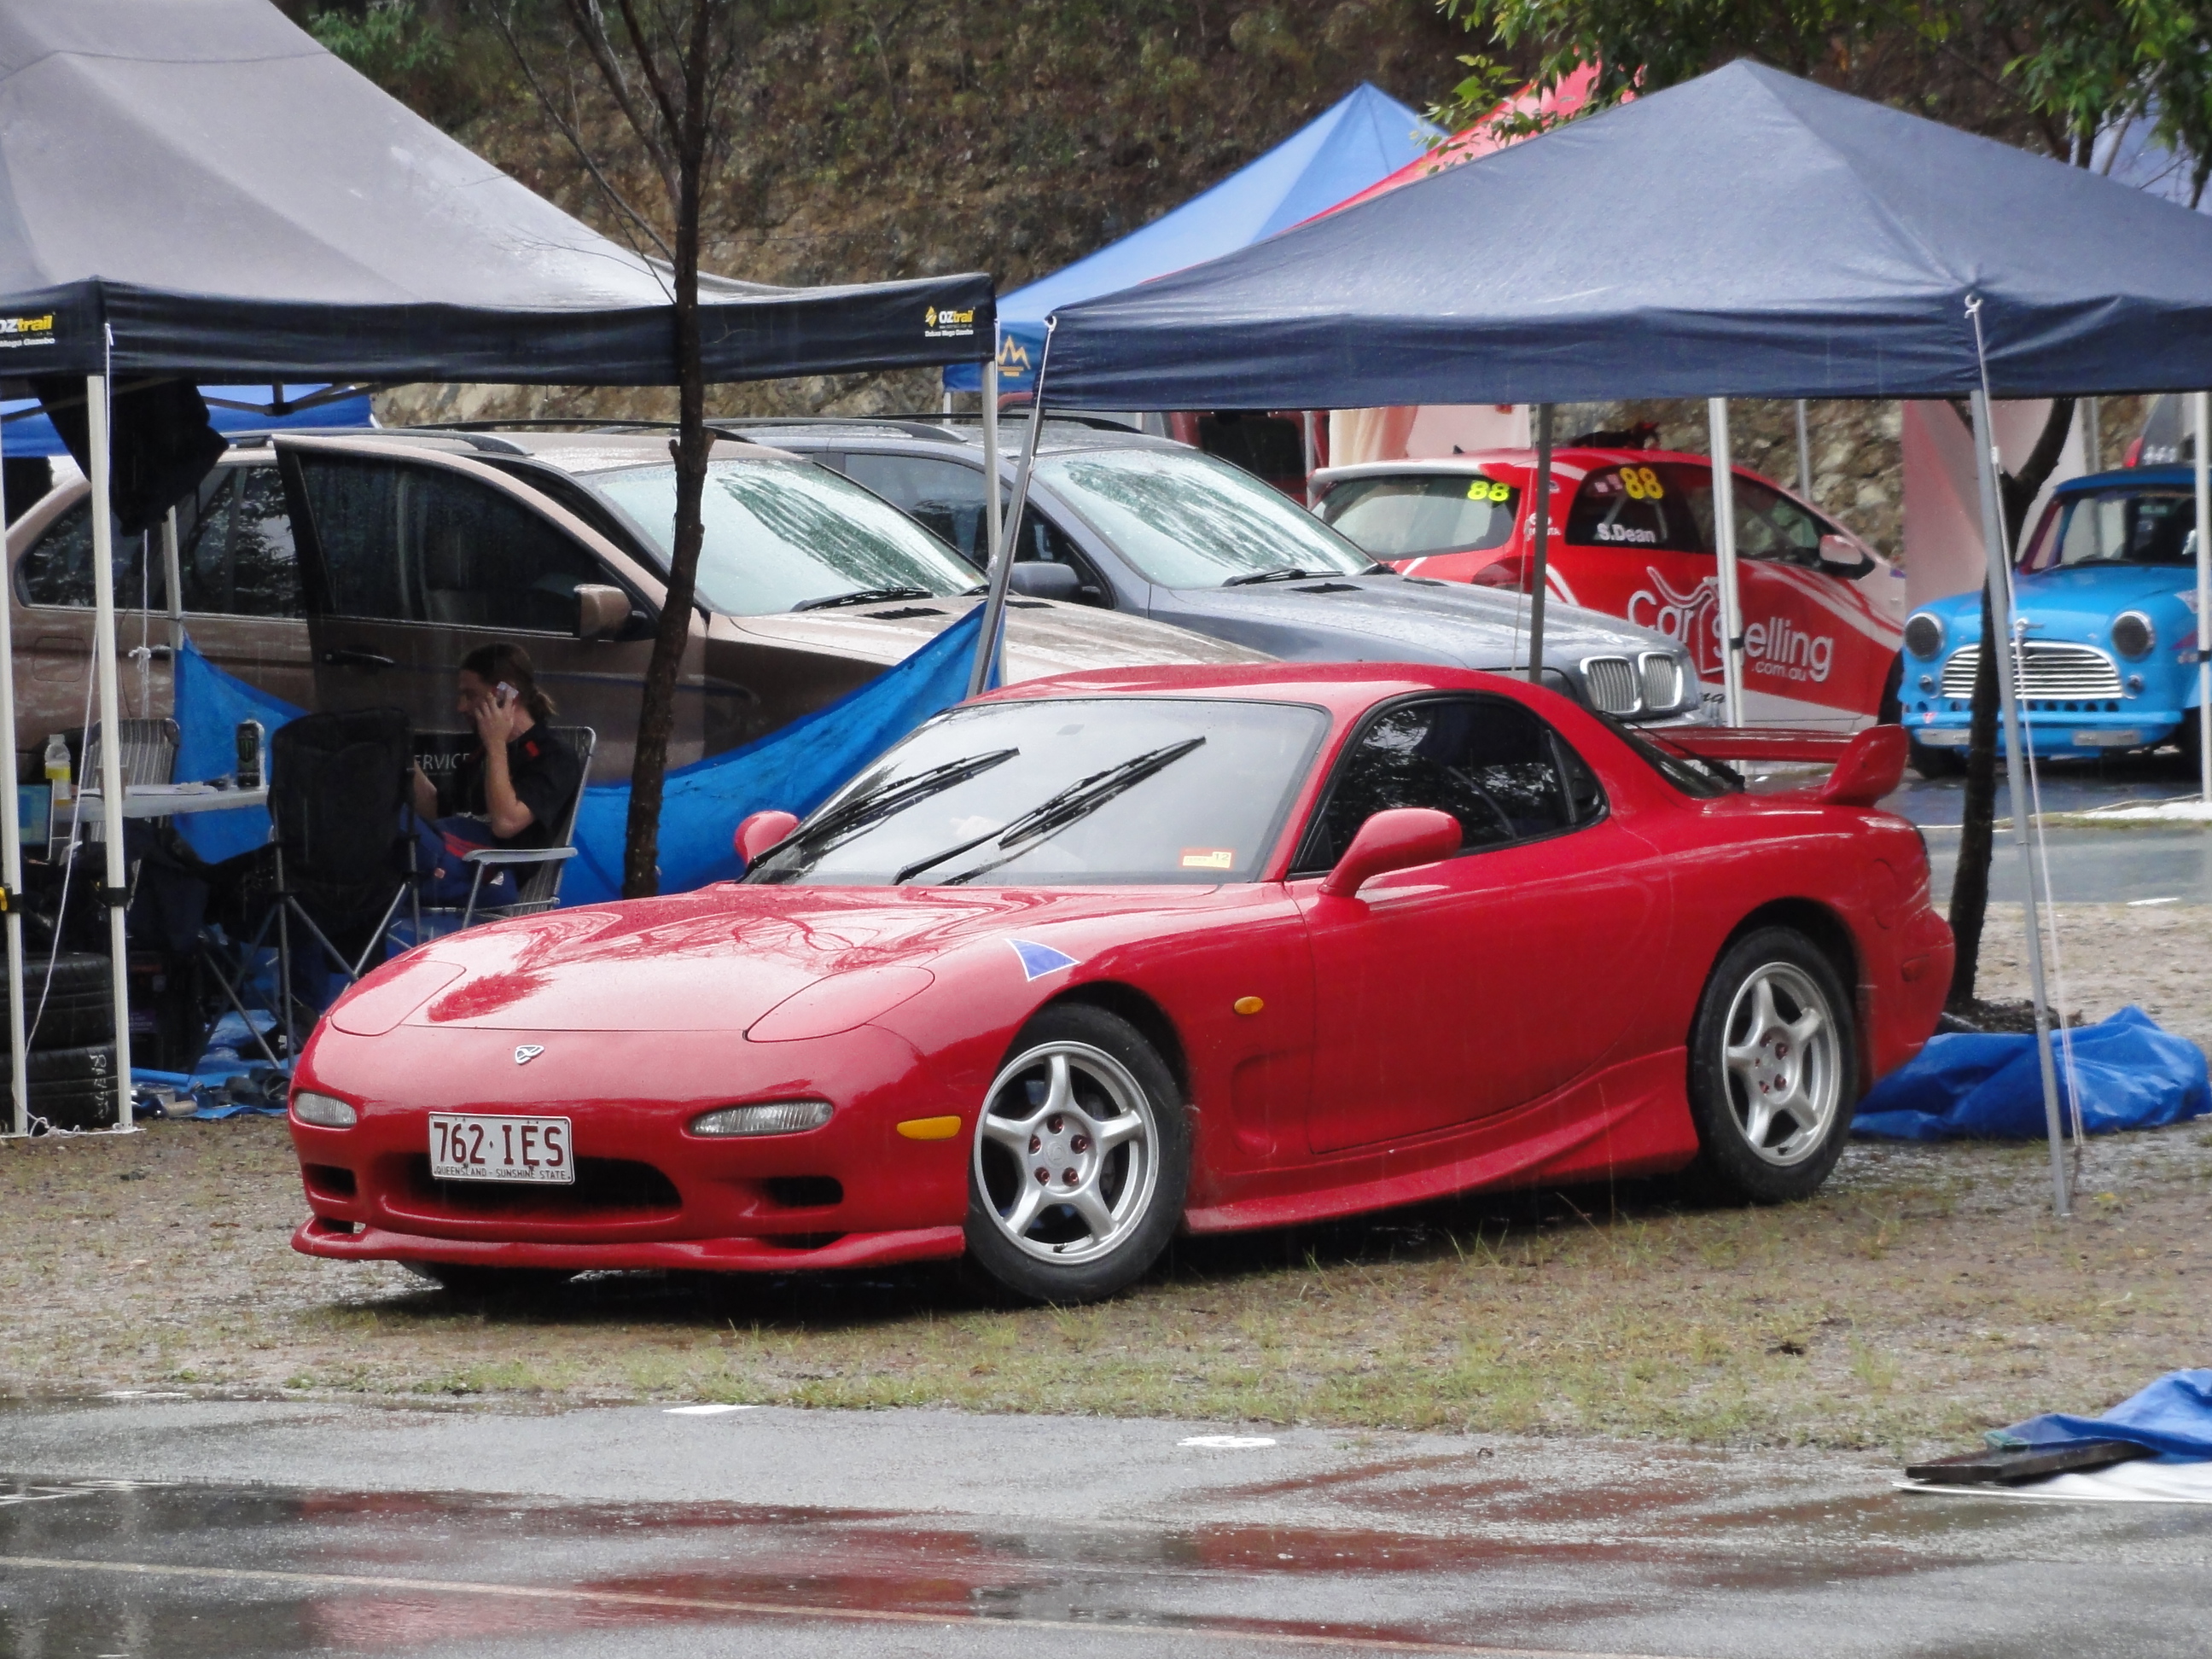 Cameron Hurman's RX7 in the Pits ready for the next run at QHC 2012 Mt Cotton